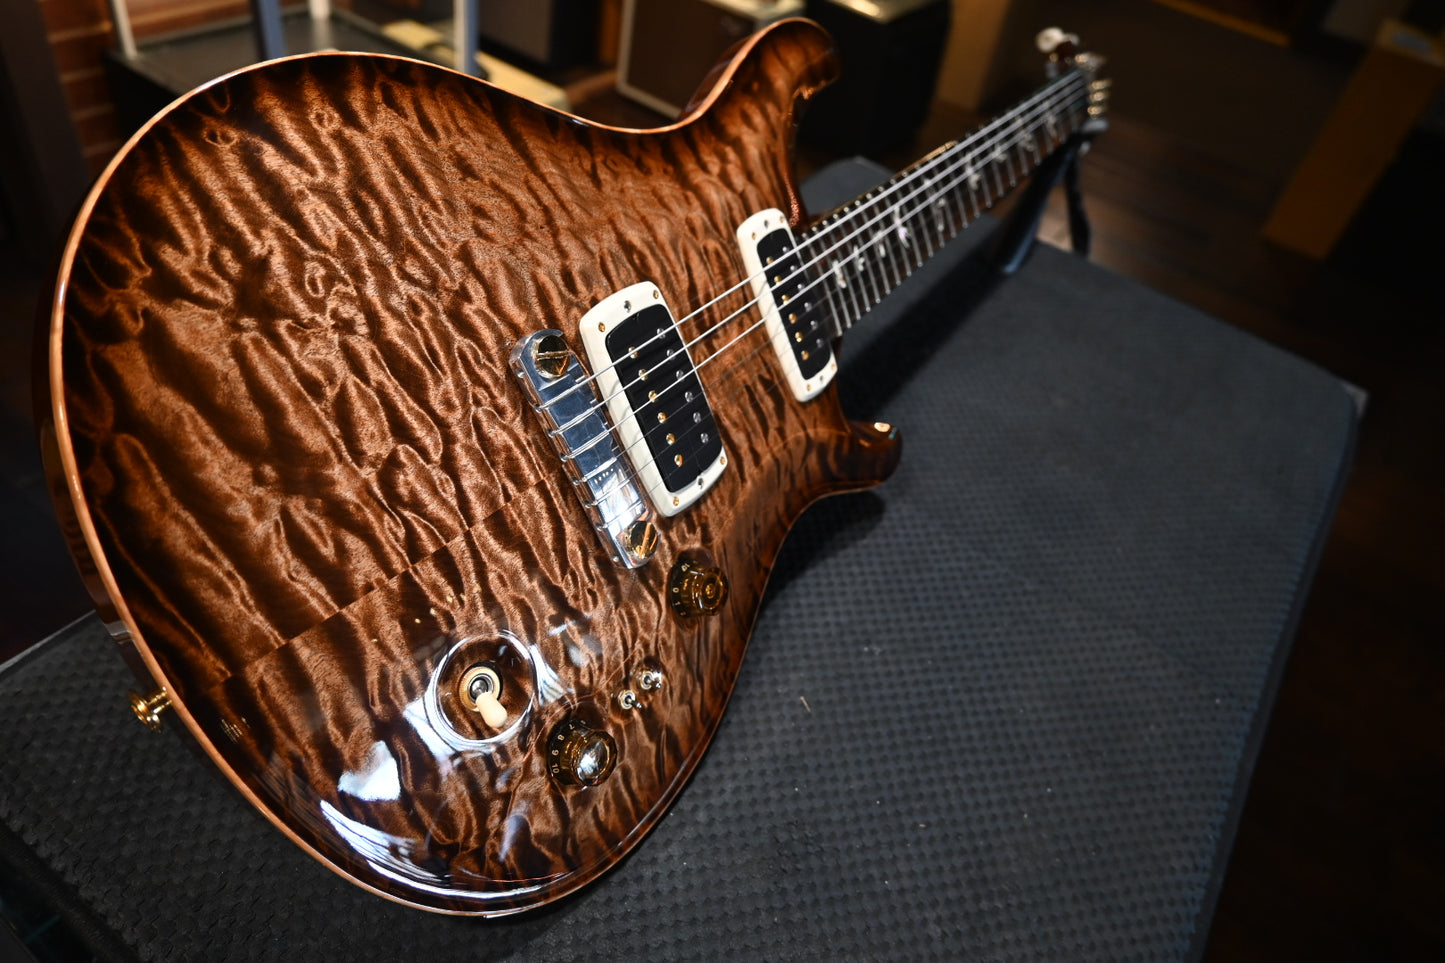 PRS Private Stock Signature Limited 2011 #61 of 100 - Mocha Smoked Burst Guitar #7788 PRE-OWNED - Danville Music